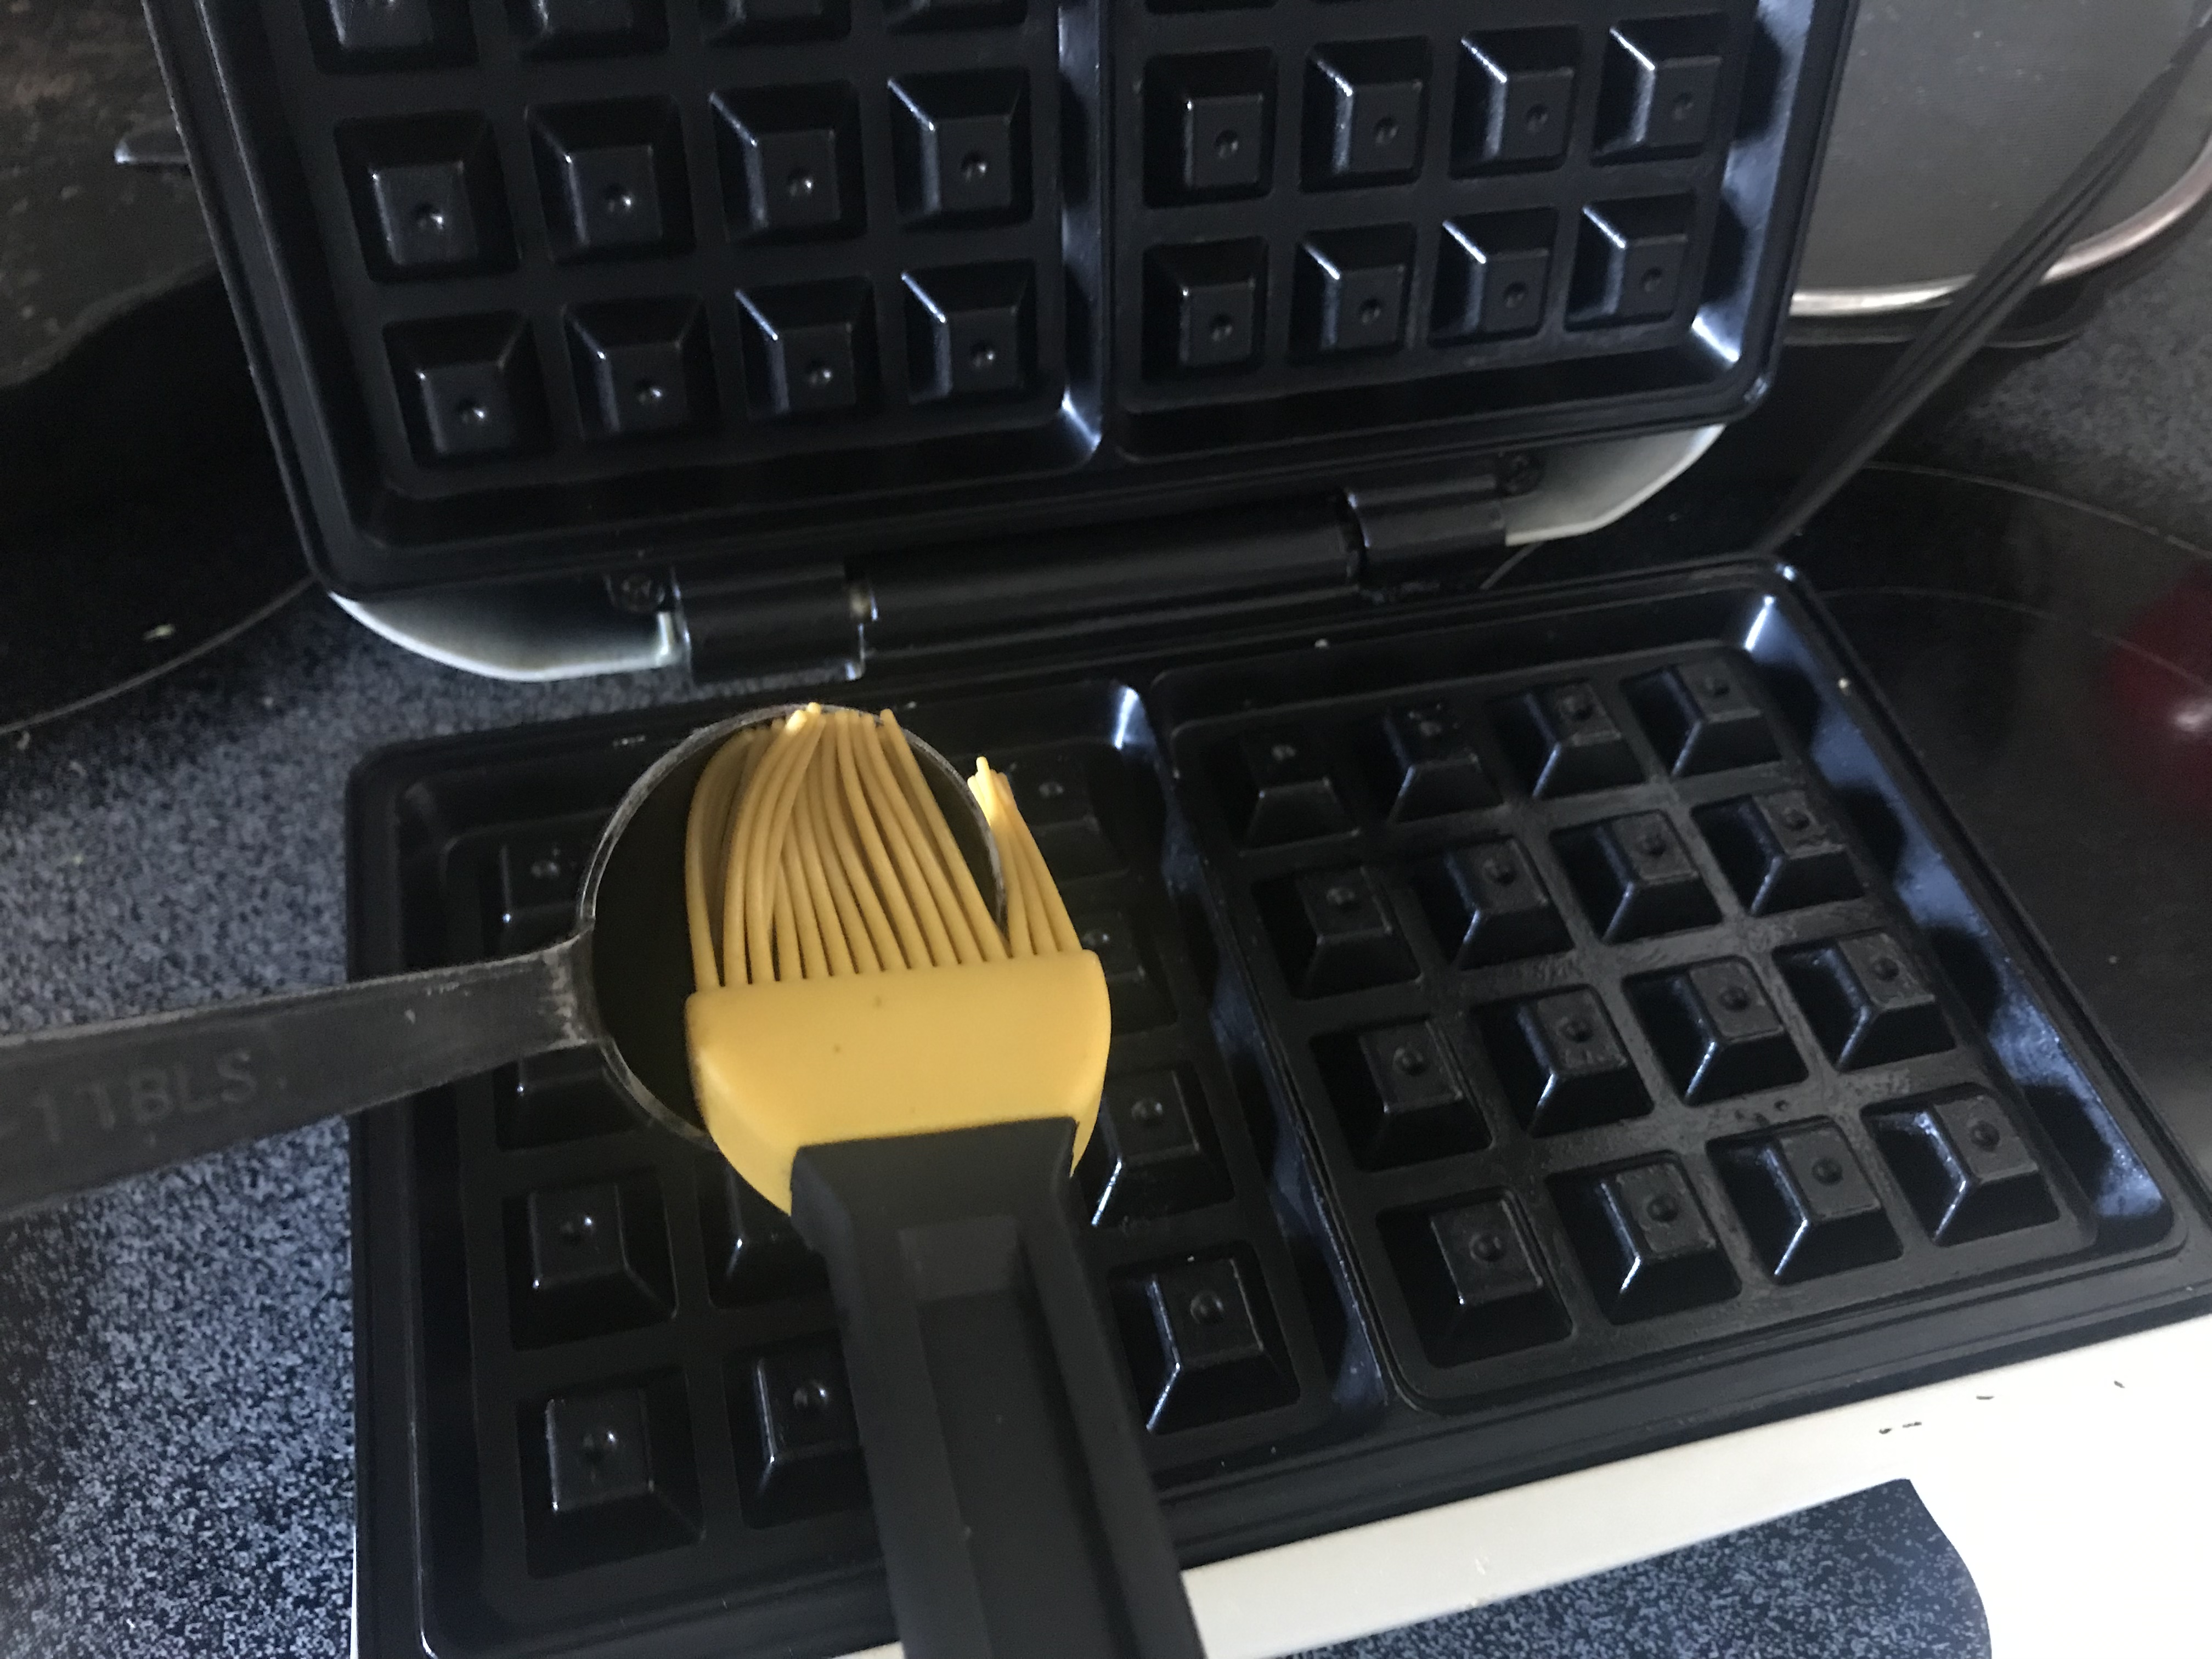 oiling the waffle iron with oil from measuring spoon